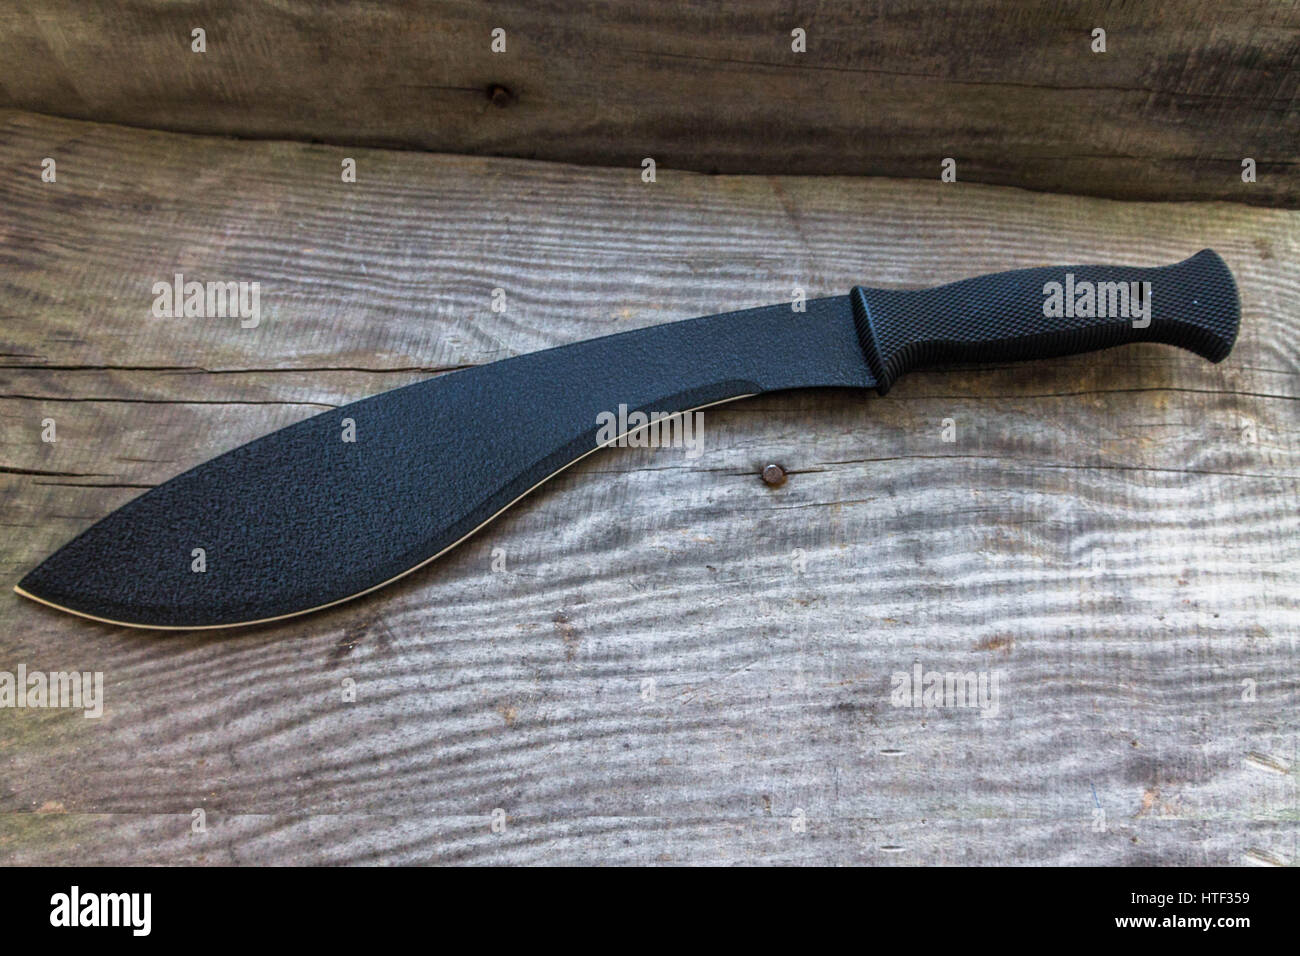 Kukri. Large knife. Machete. Top view. Large knife for rural work. Knife for cutting brushwood. Stock Photo